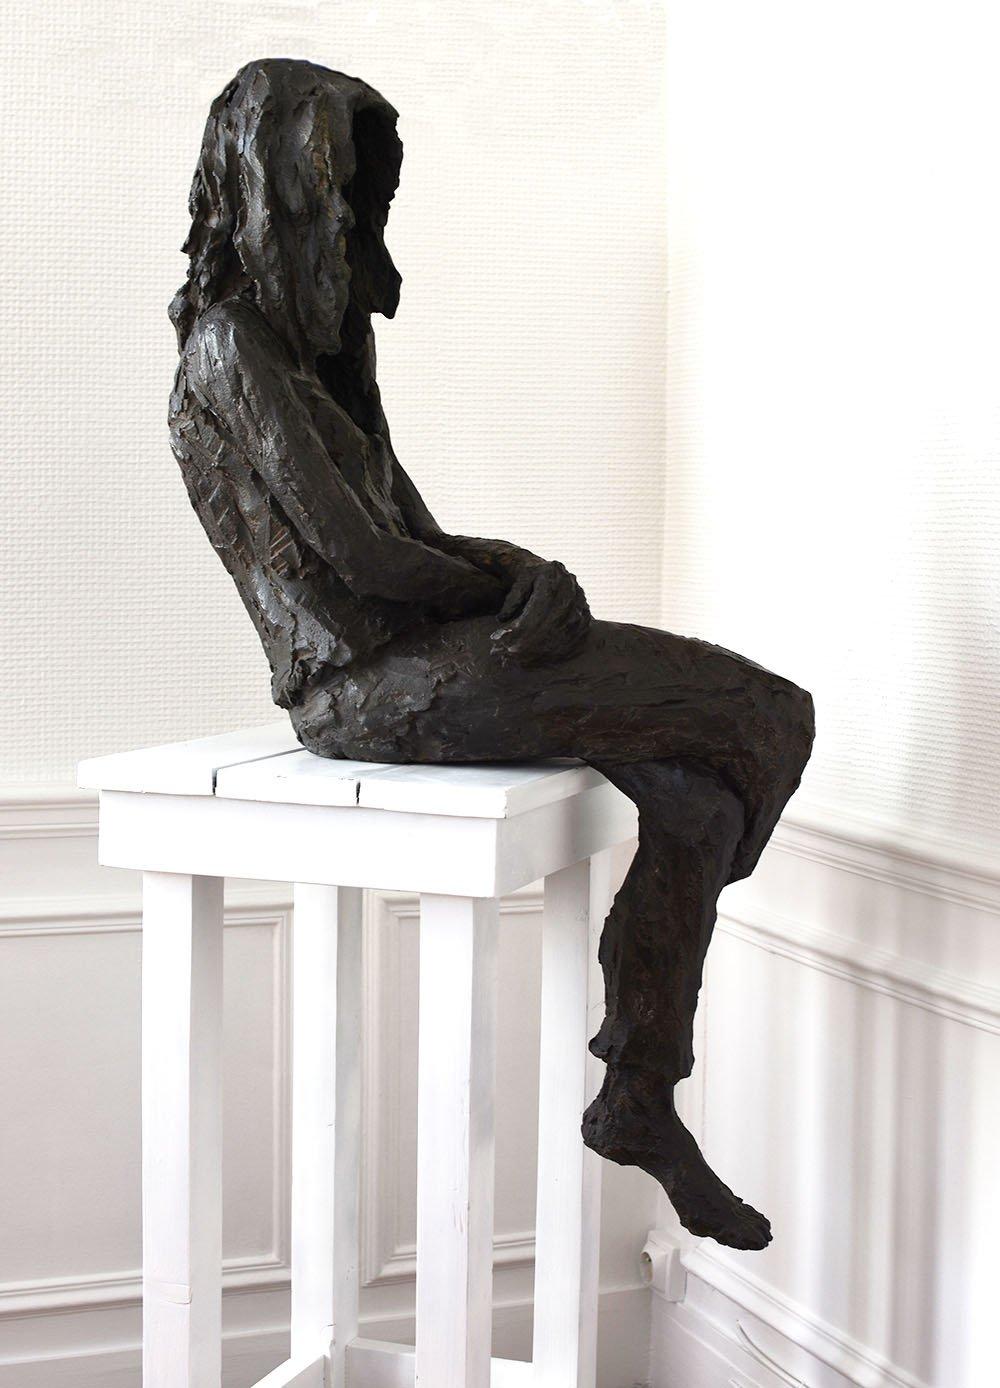 Girl’s dream by Cécile Raynal - Woman's figure sculpture, bronze, absence For Sale 1